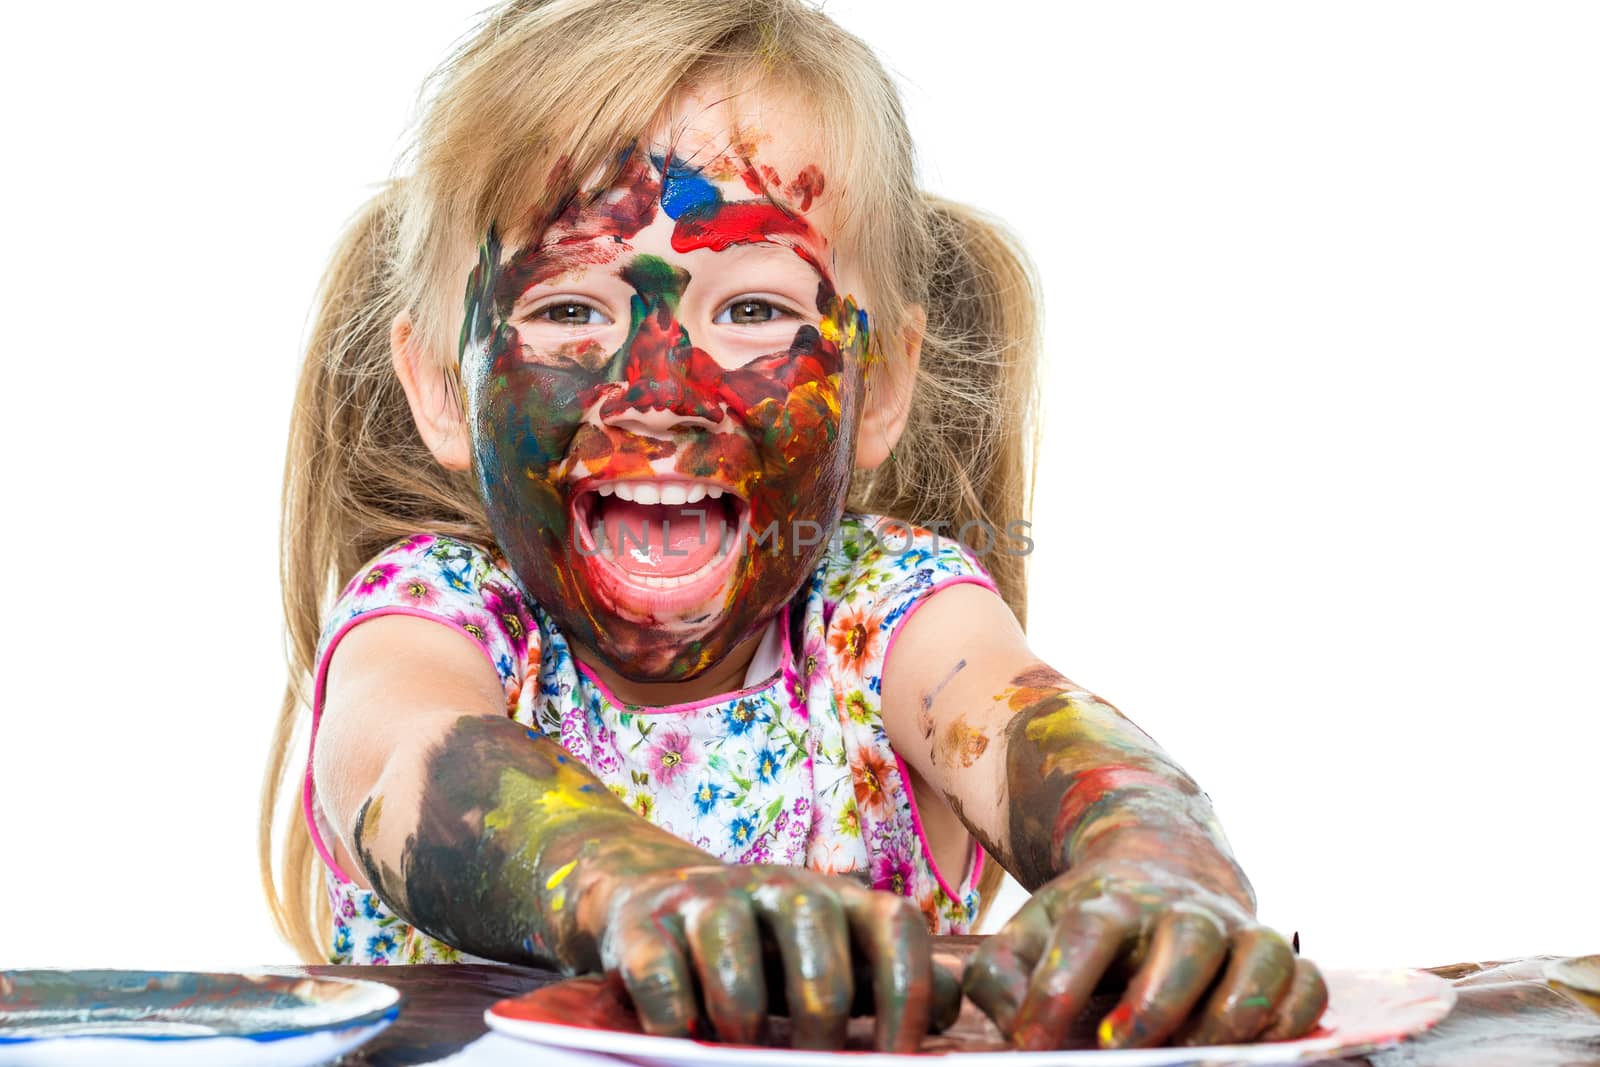 Close up portrait of Excited little kid painting and messing with color paint.Isolated on white background.
